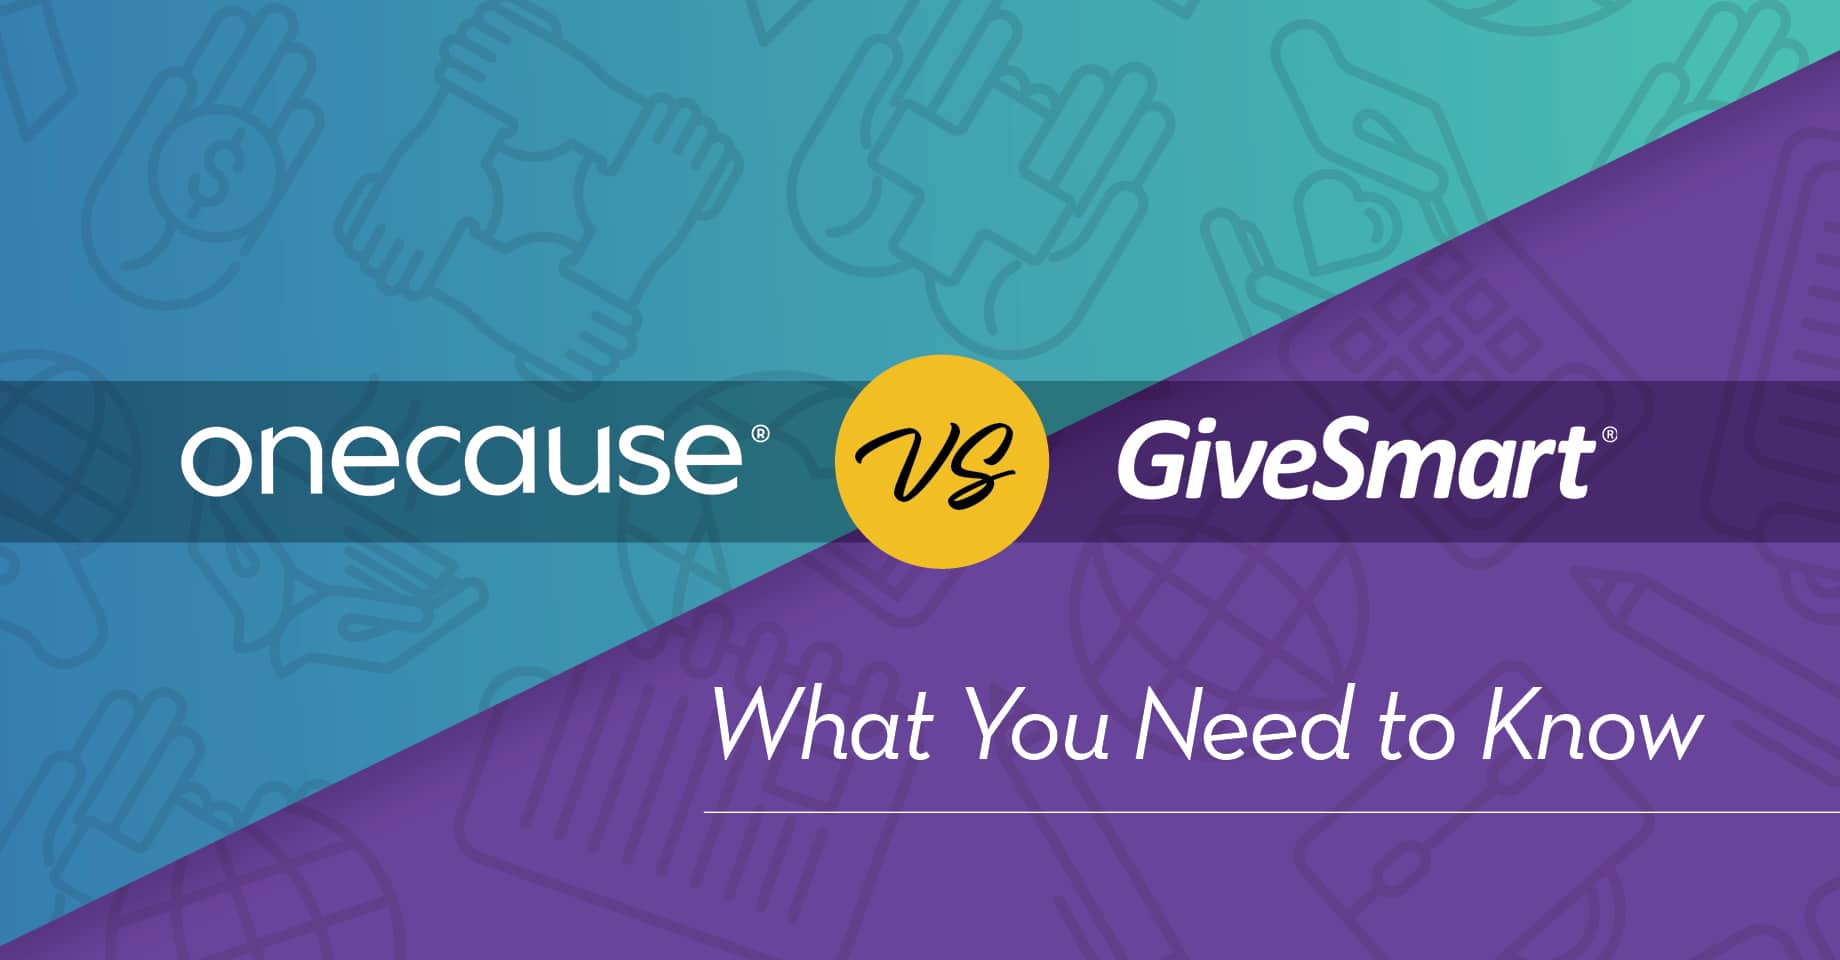 OneCause vs. GiveSmart What You Need to Know